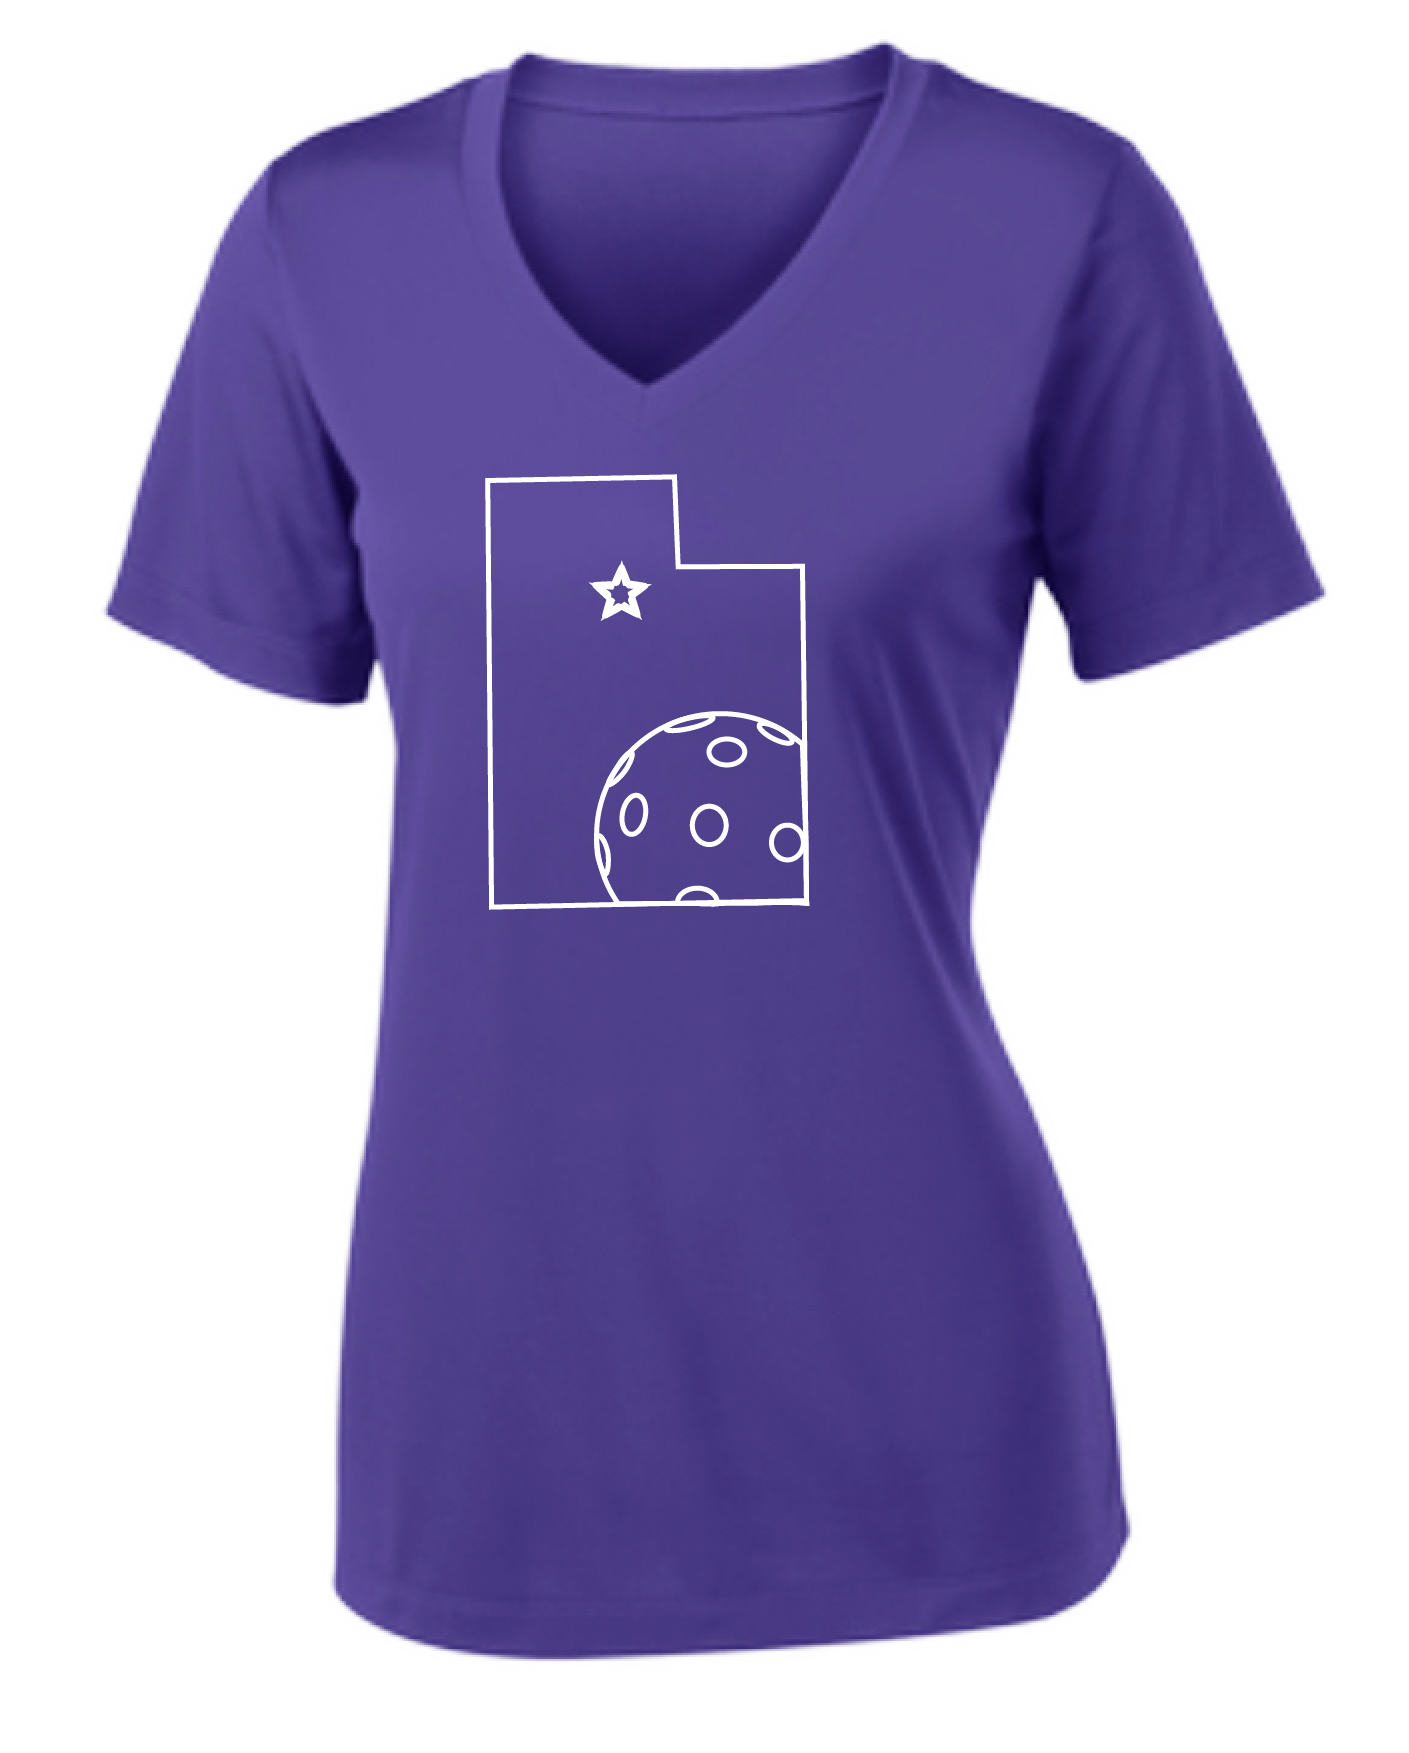 Pickleball Design: Utah Pickleball.   Women's Styles: Short-Sleeve V-Neck  Turn up the volume in this Women's shirt with its perfect mix of softness and attitude. Material is ultra-comfortable with moisture wicking properties and tri-blend softness. PosiCharge technology locks in color. Highly breathable and lightweight.